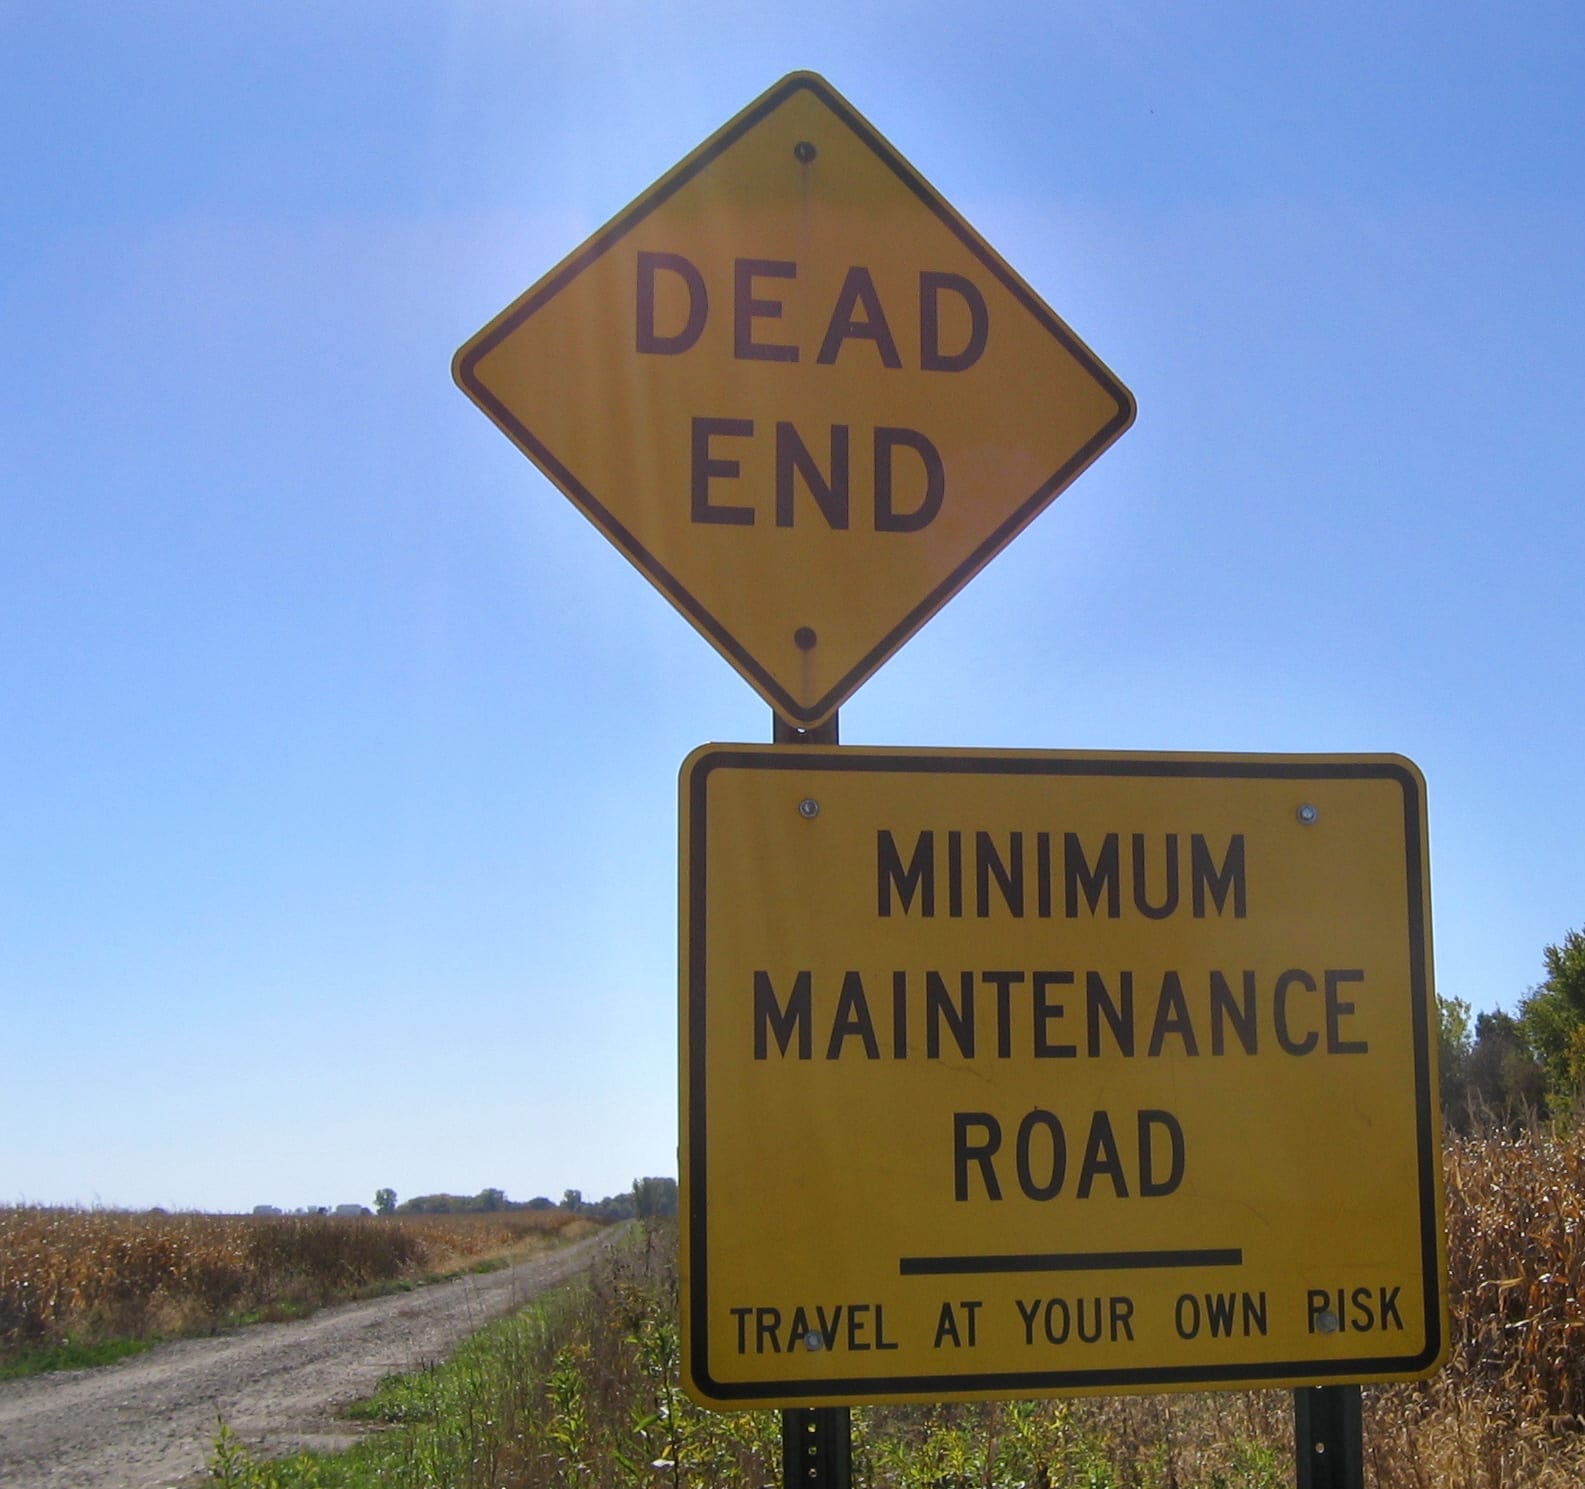 Website Maintenance represented by maintanence road sign